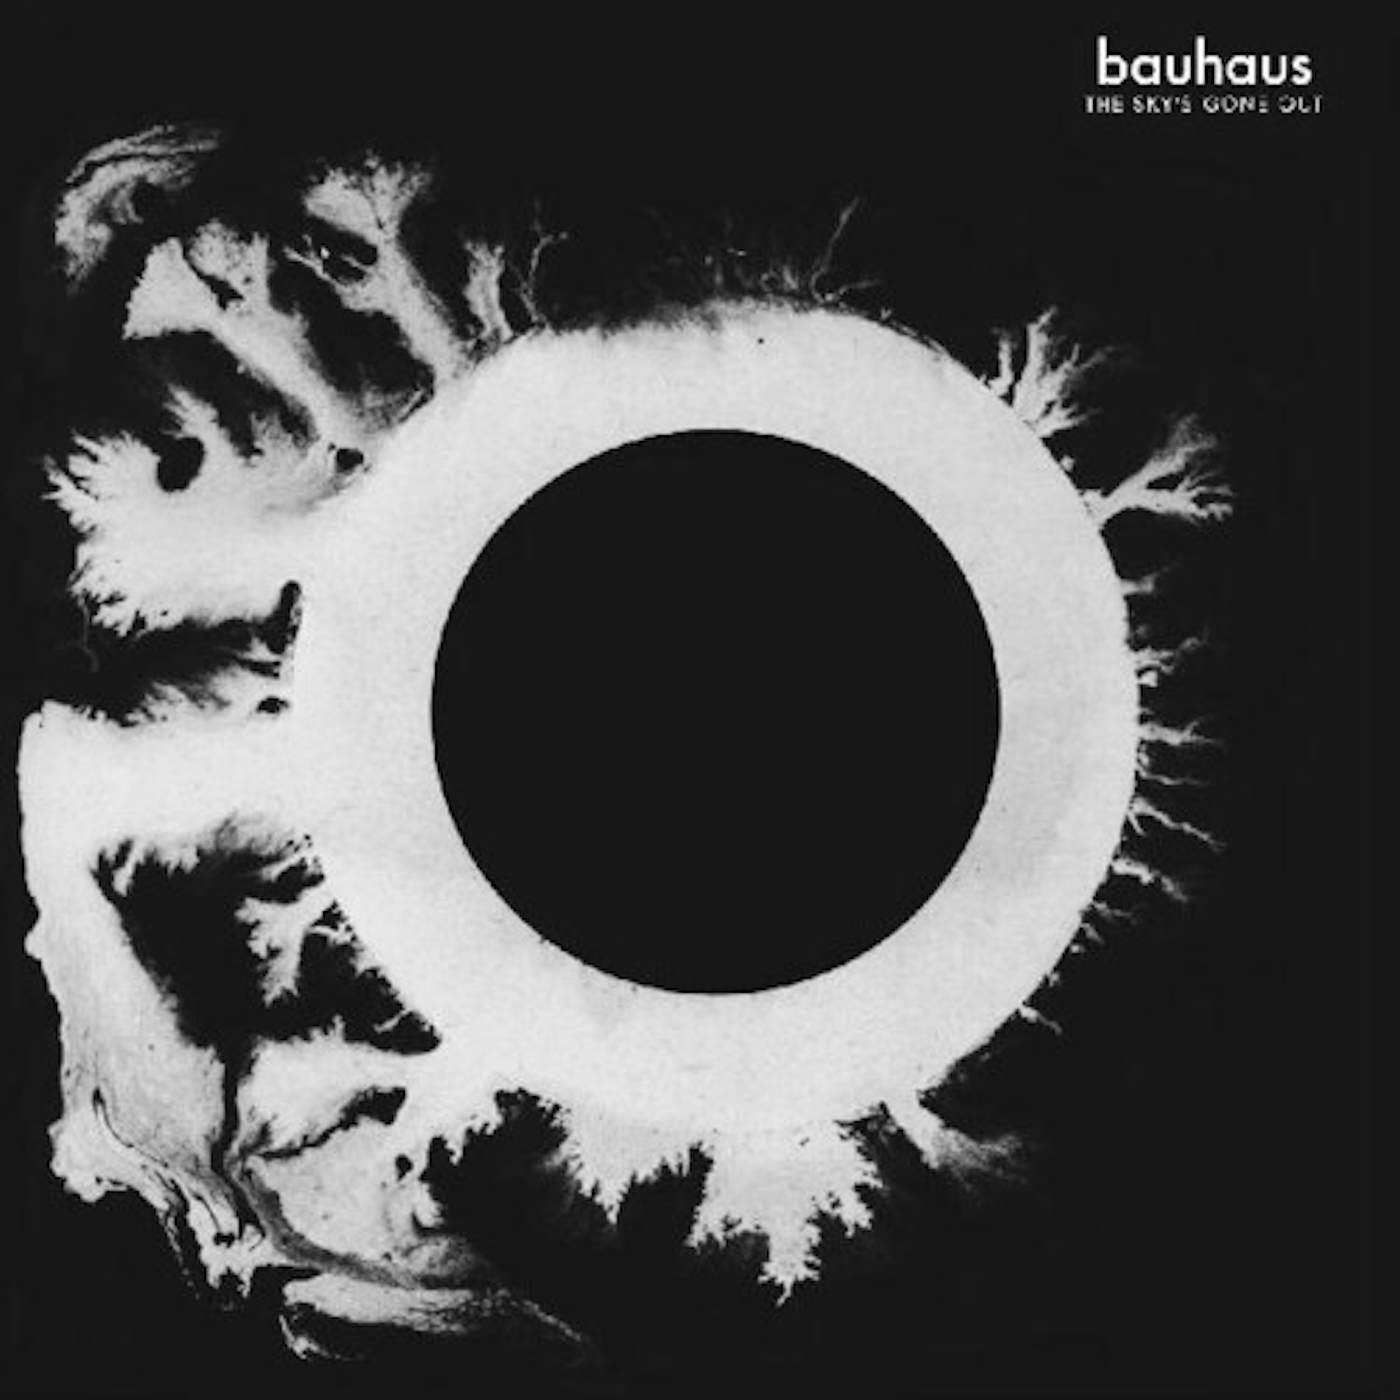 Bauhaus SKY'S GONE OUT CD